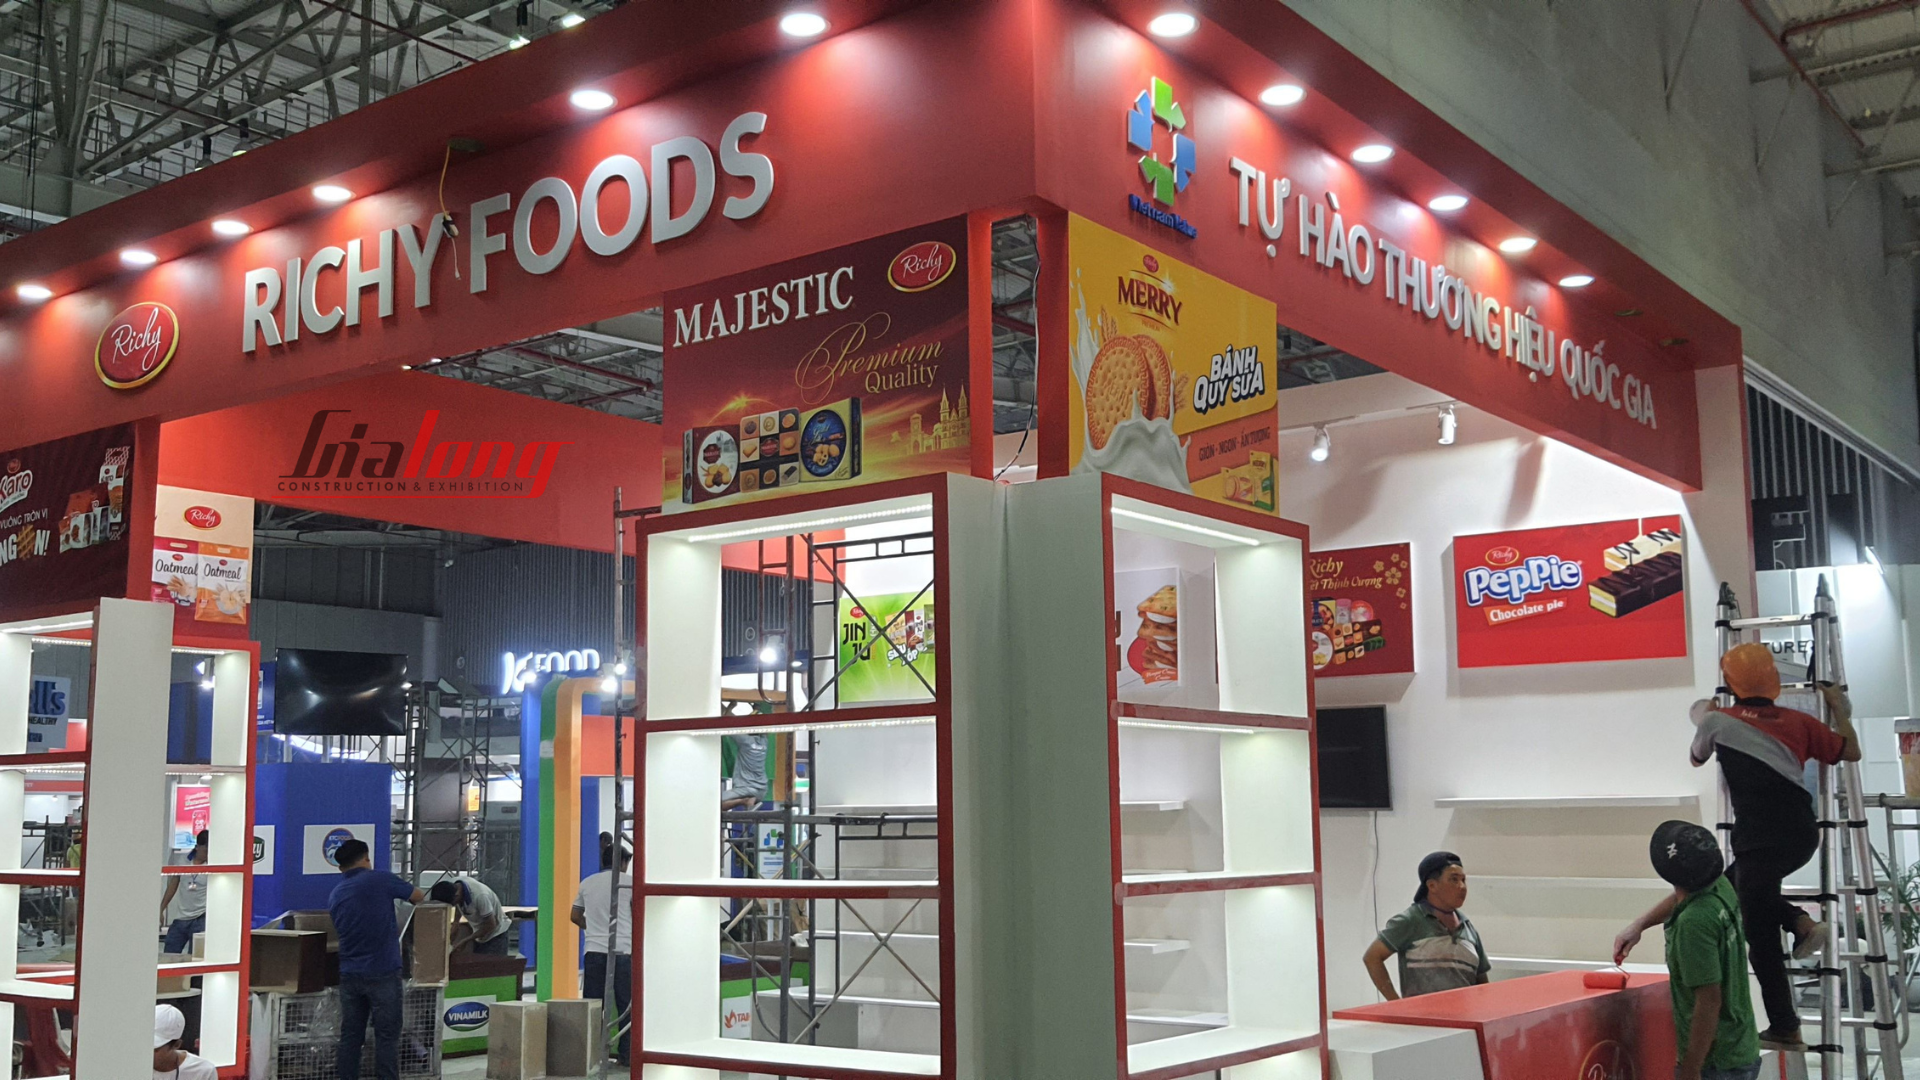 RICHY FOODS - The booth was constructed and designed by Gia Long